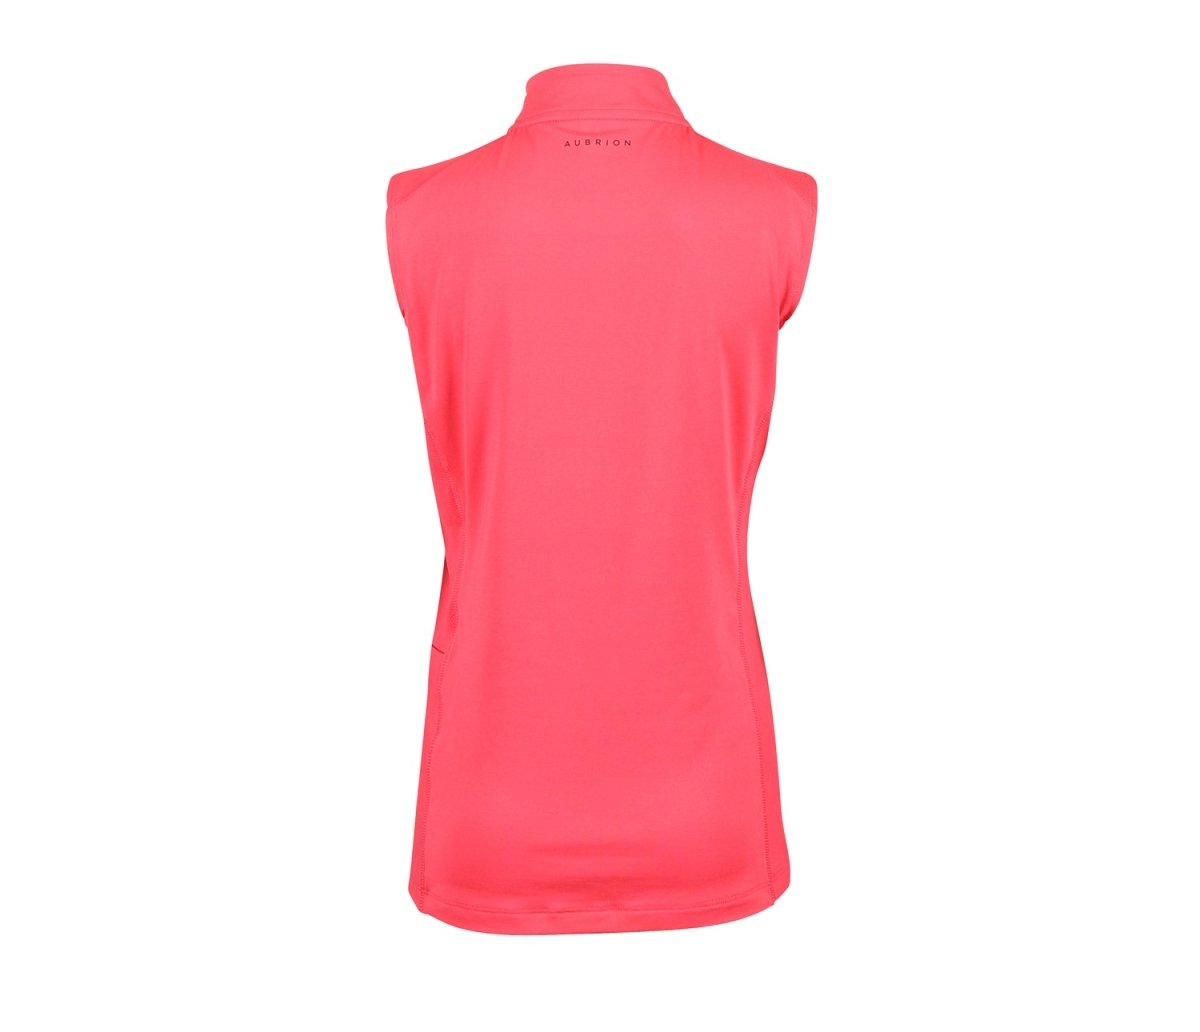 Aubrion SS24 Revive Sleeveless Base Layer - Young Rider - Coral - 7/8 Years